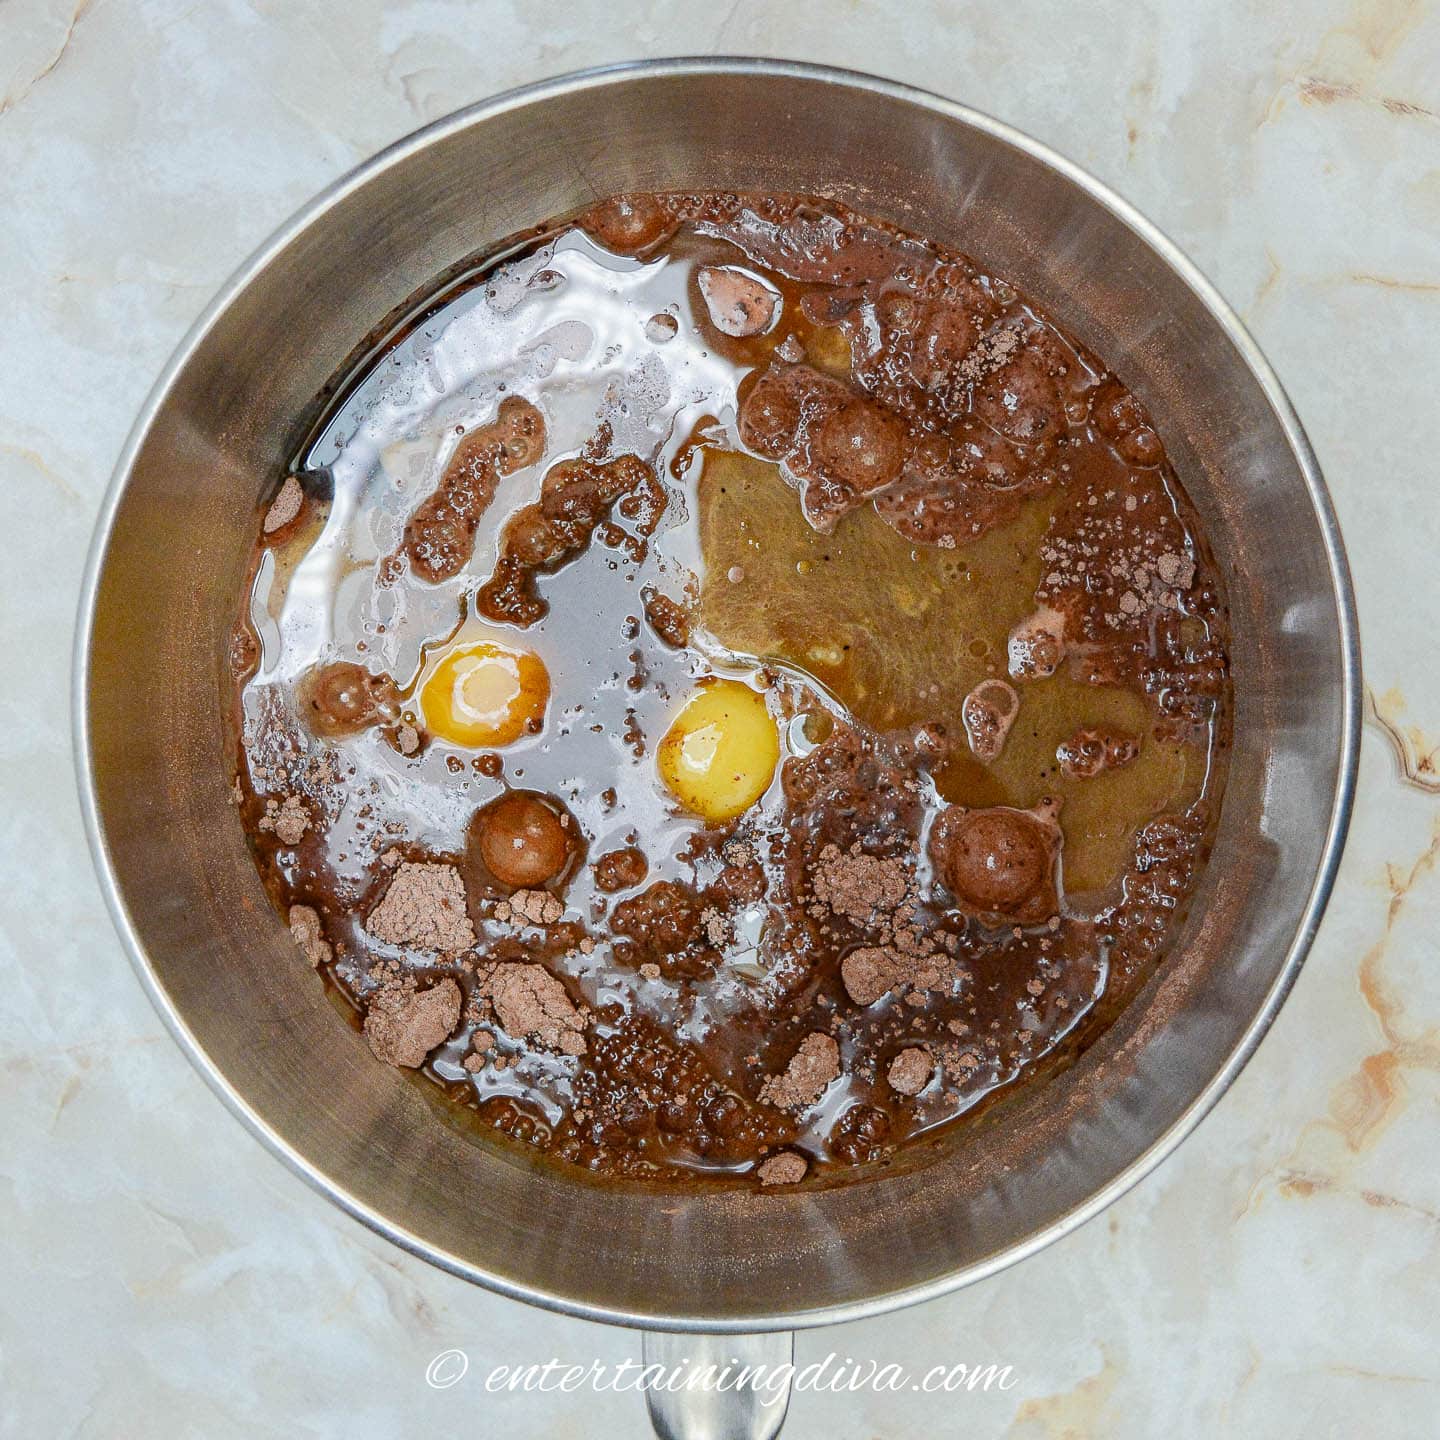 Chocolate cupcake ingredients including eggs in a mixing bowl